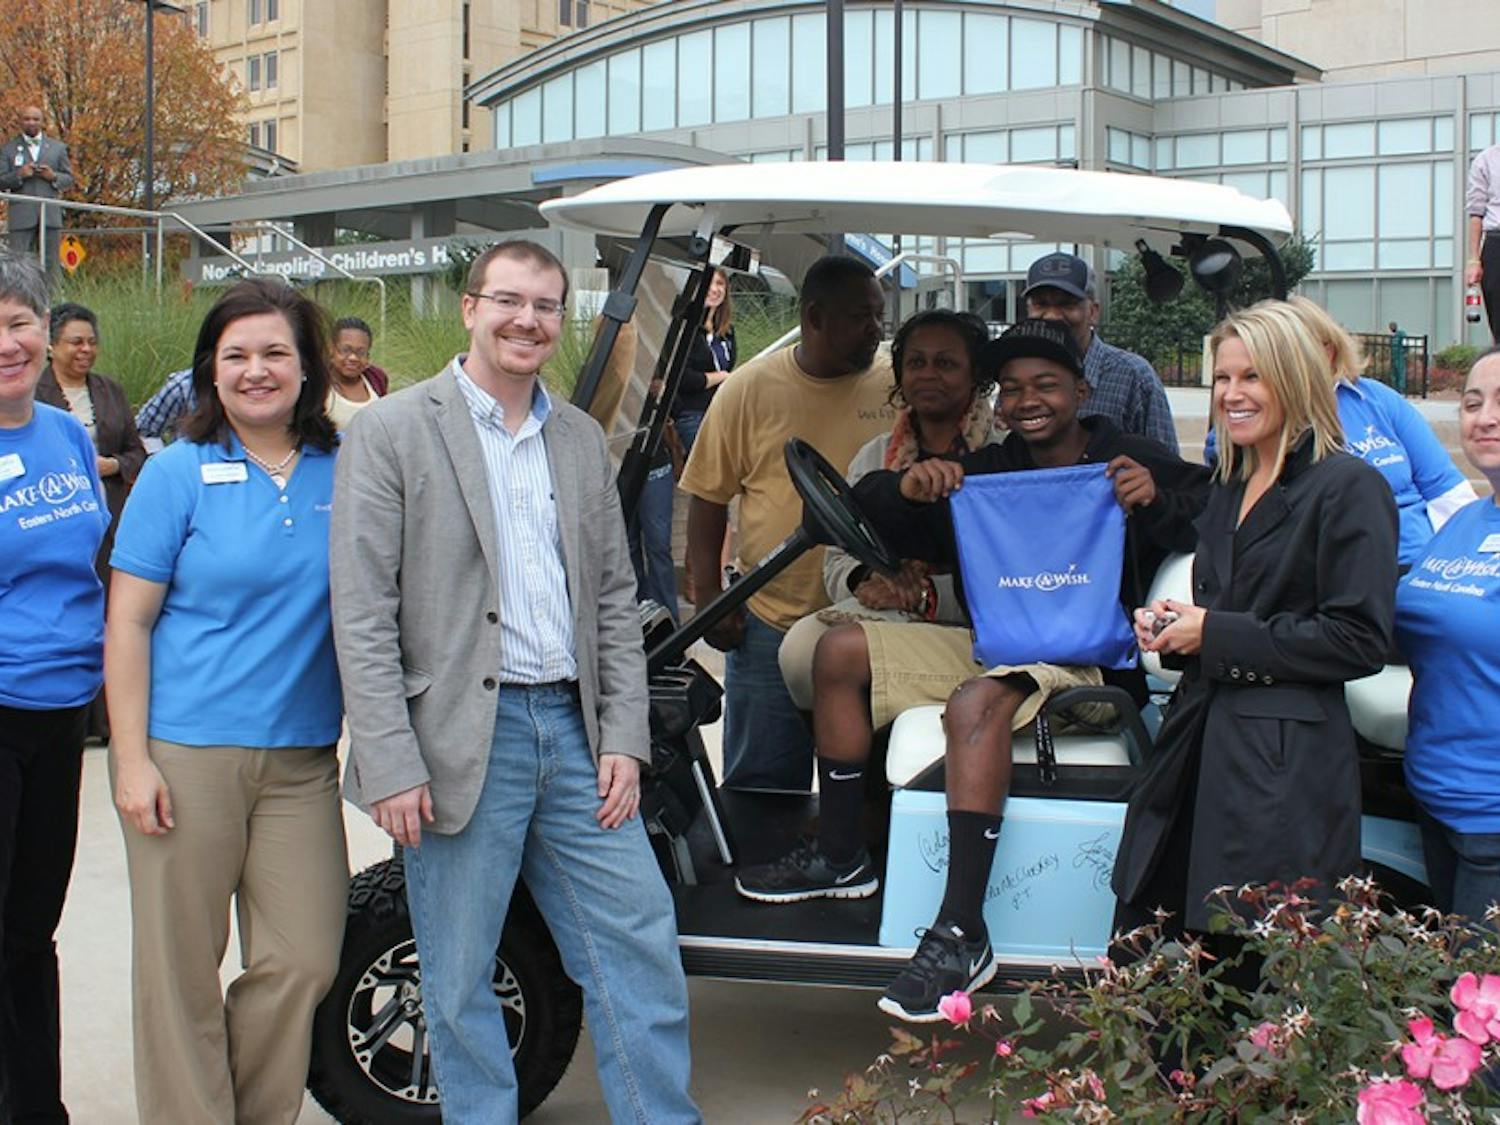 On Friday bone cancer survivor Kzon Crenshaw, pictured with his family and team, received a custom Carolina blue golf cart signed by the people who supported him through his illness. In describing the people behind the signatures Crenshaw said, "They're my superstars."